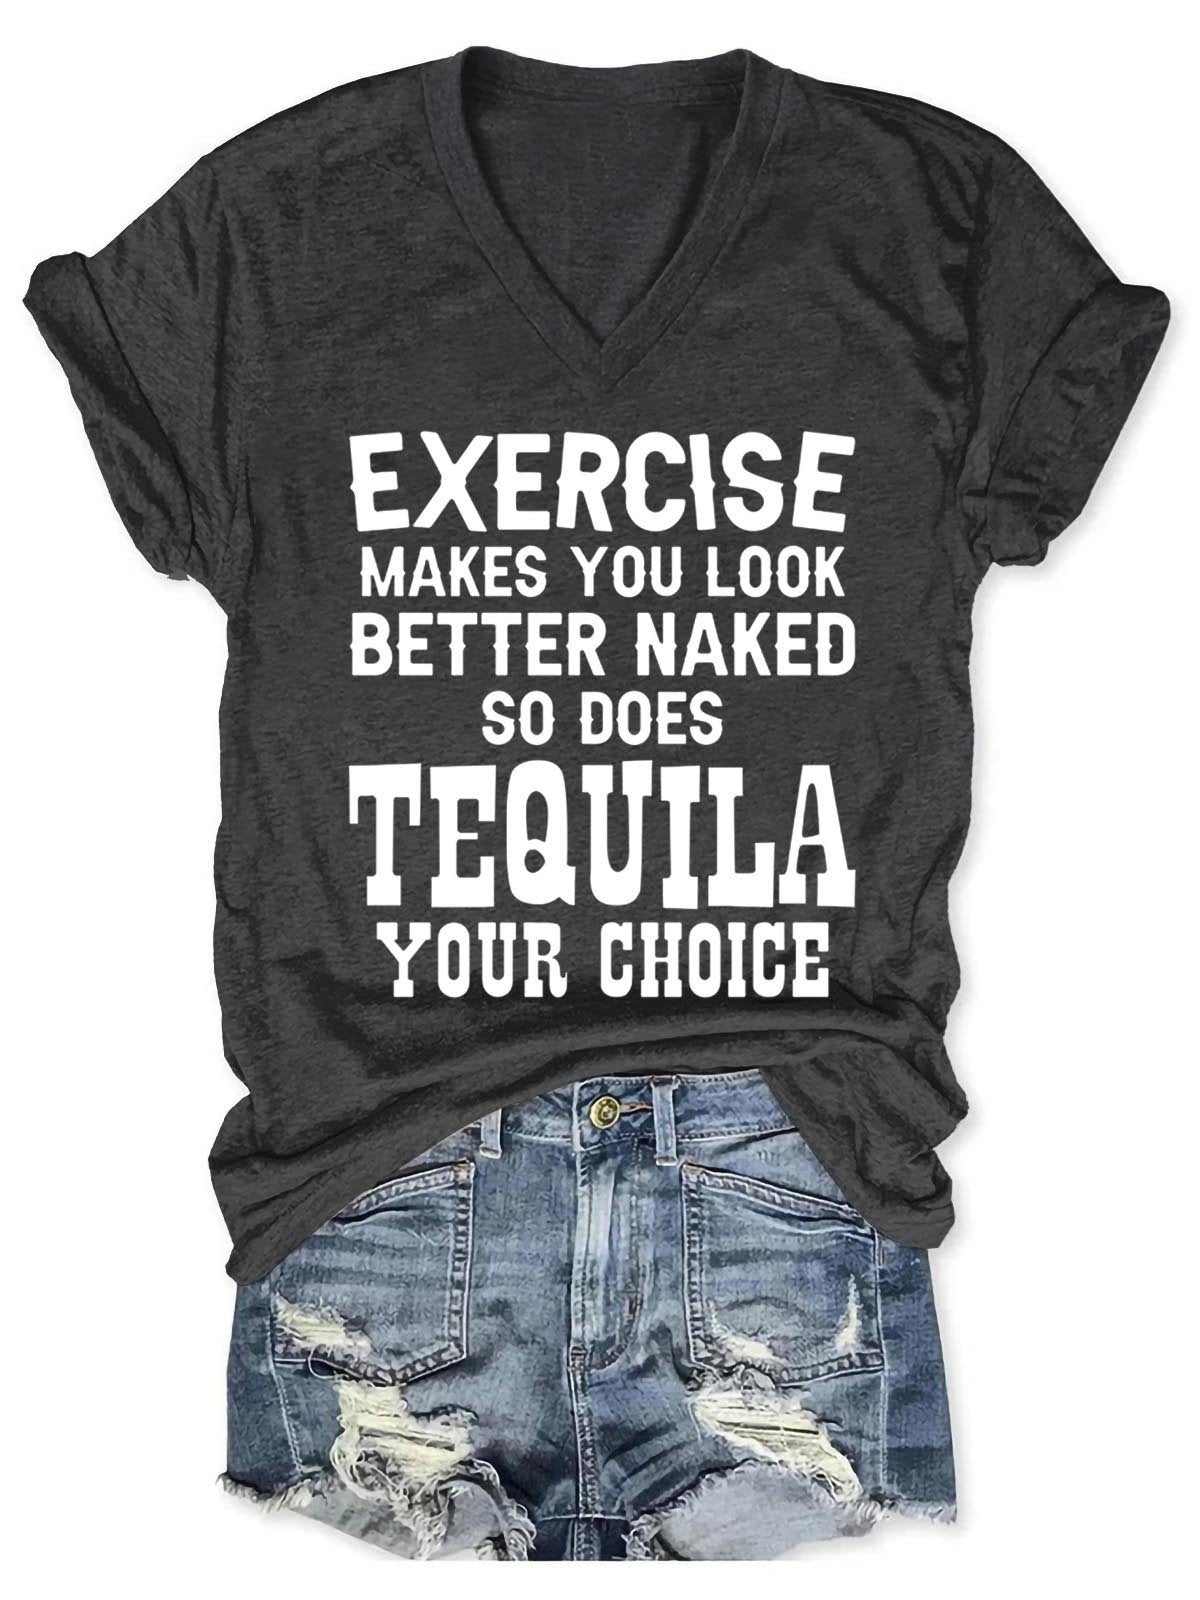 Women's Exercise Makes You Look Better Naked So Does Tequila Your Choice V-Neck T-Shirt - Outlets Forever